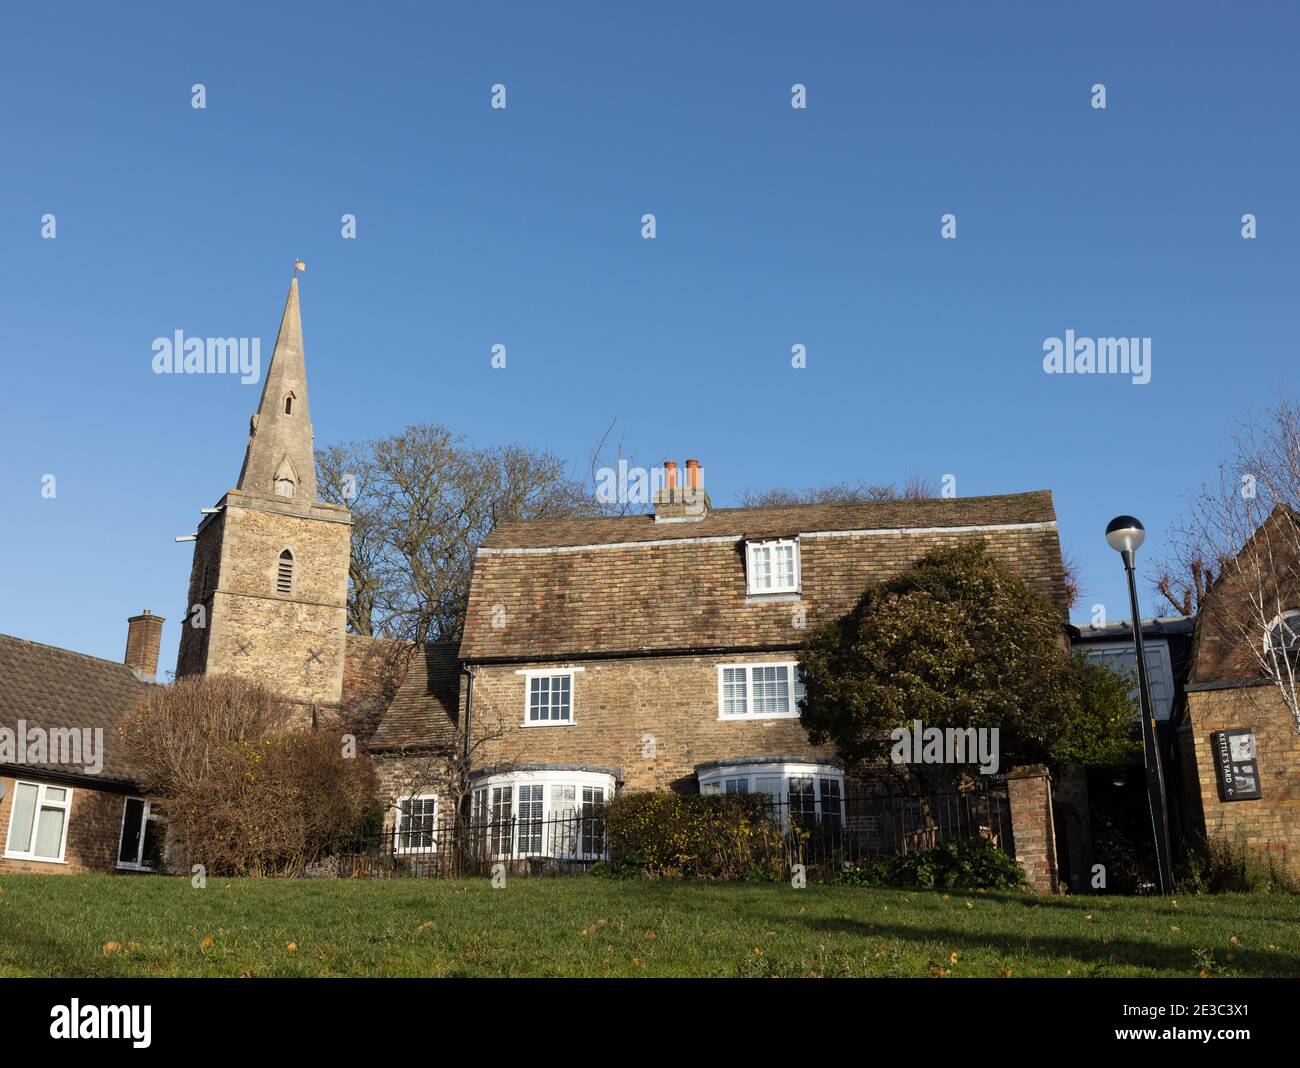 Kettle's Yard house and St Peter’s Church Cambridge England. Kettle’s Yard is University of Cambridge’s modern and contemporary art gallery. Stock Photo